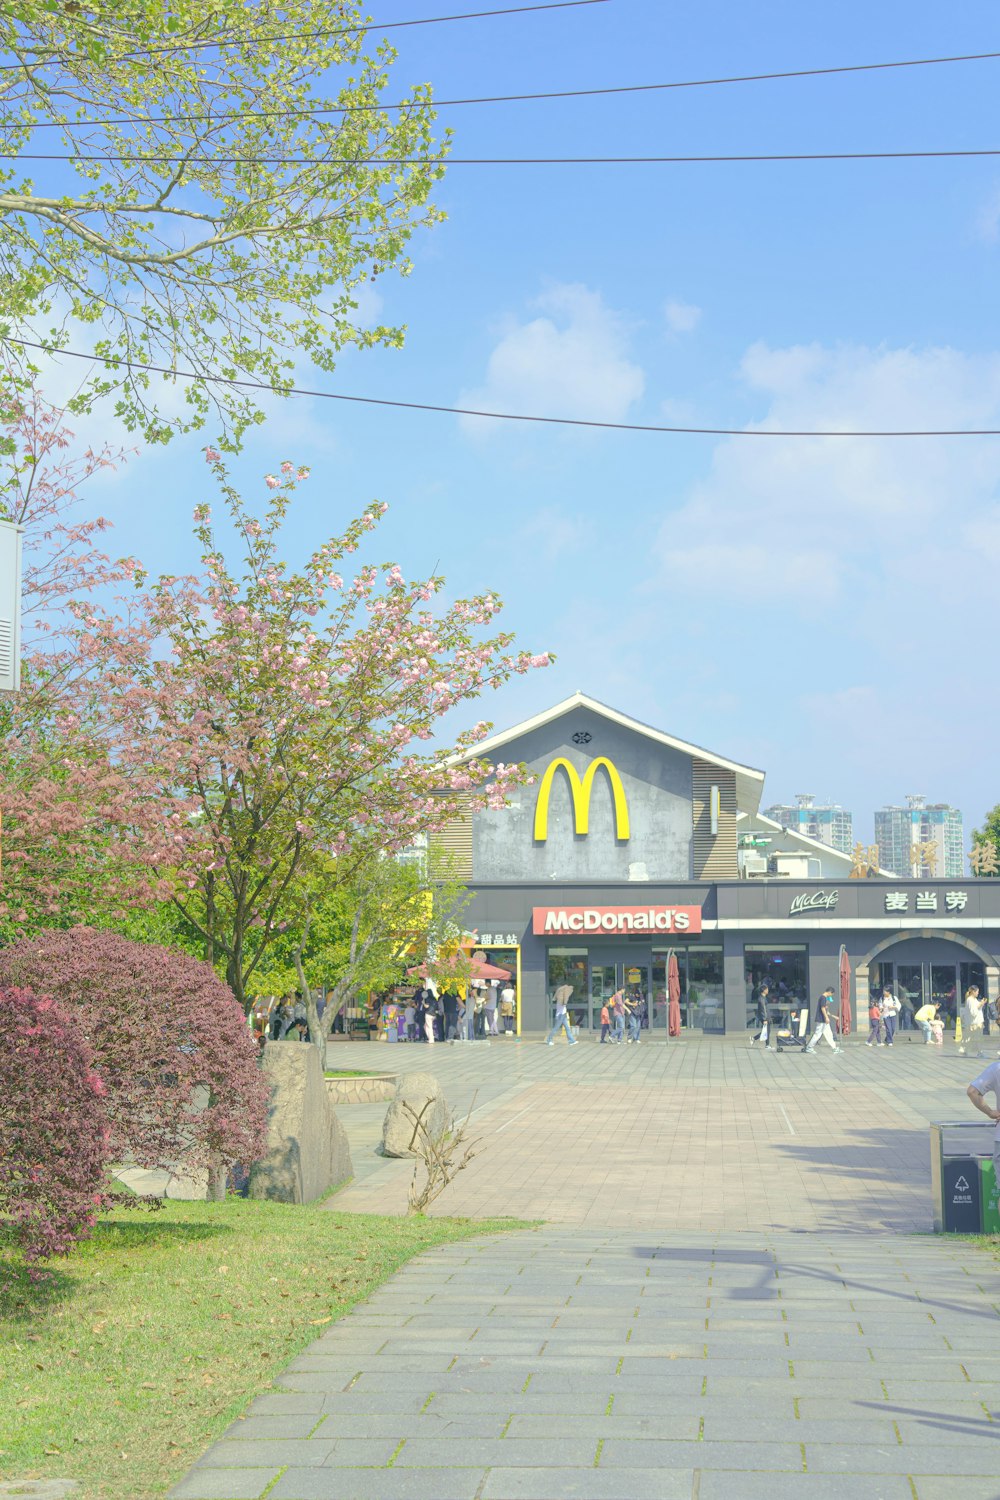 a mcdonald's restaurant with people walking around